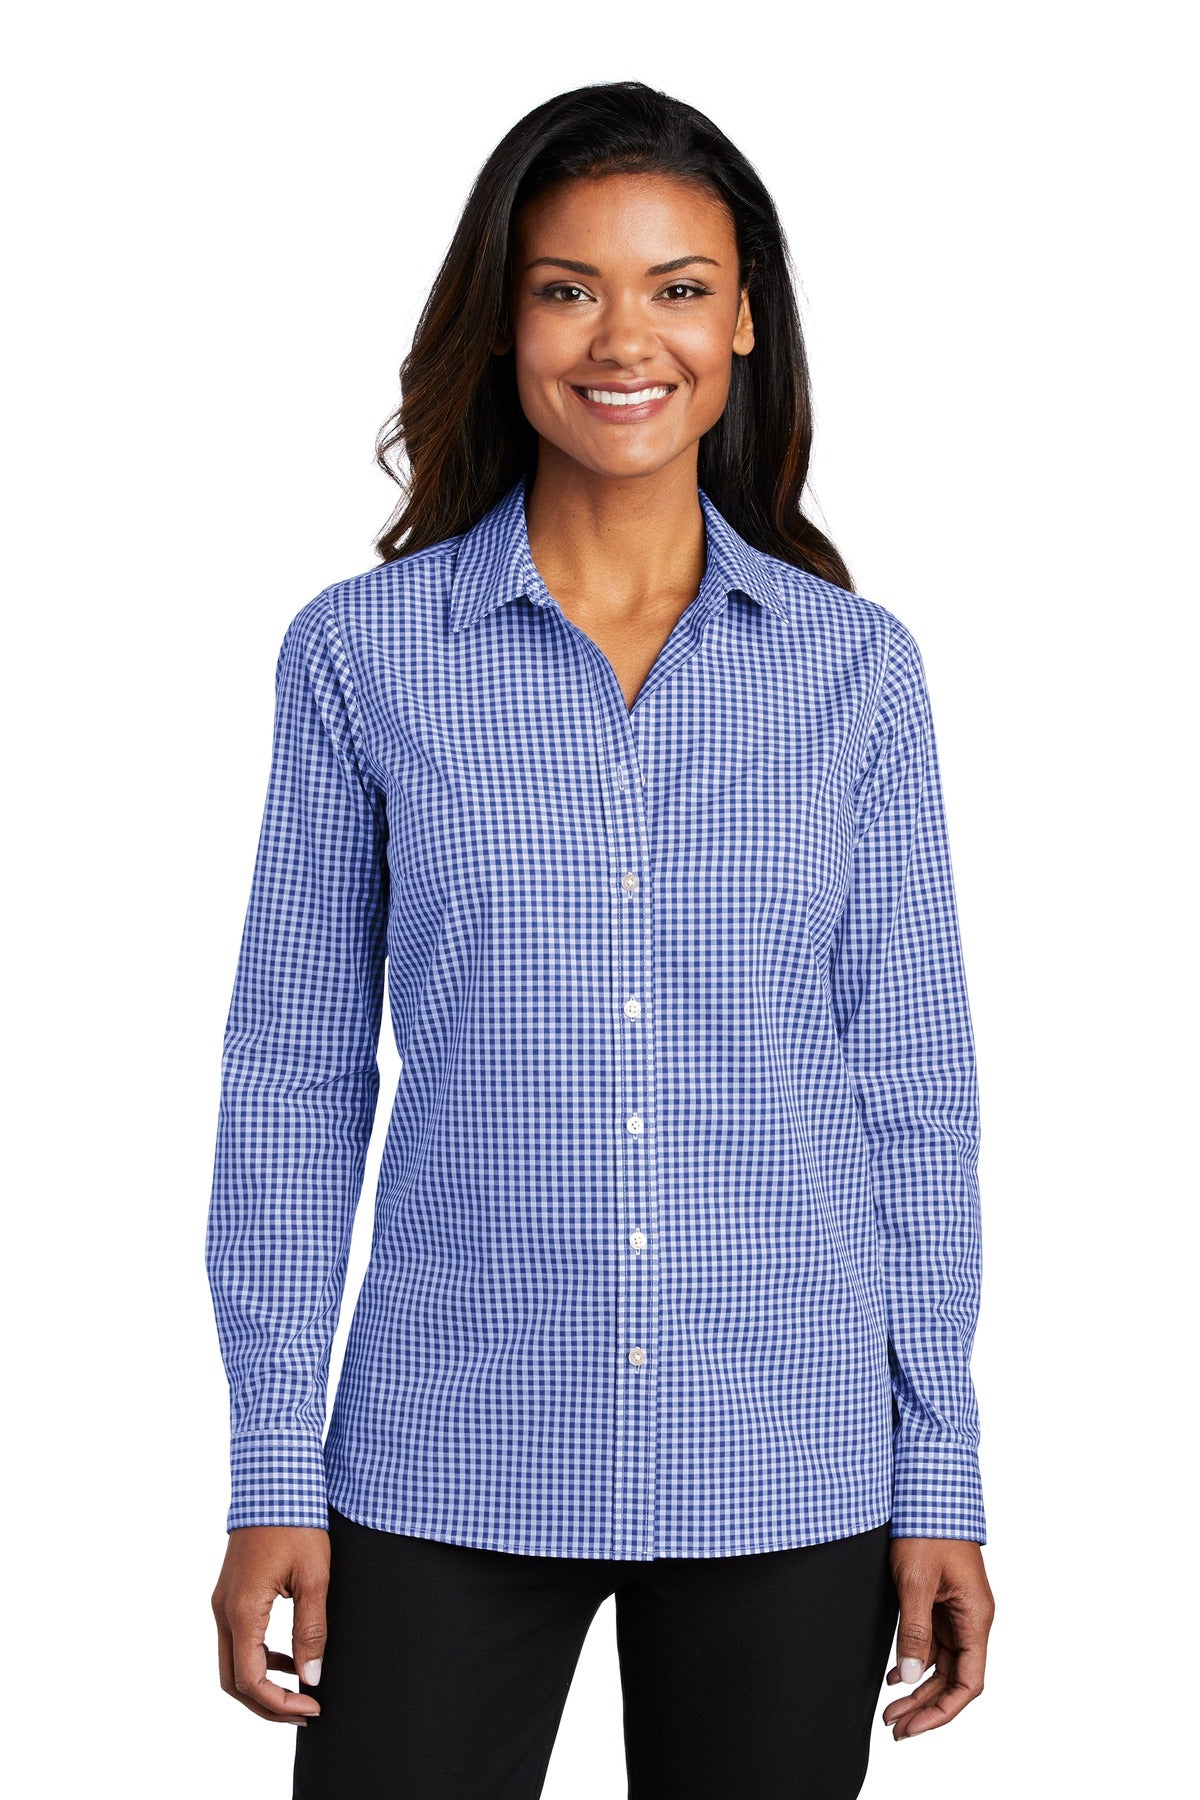 Port Authority Ladies Broadcloth Gingham Easy Care Shirt LW644